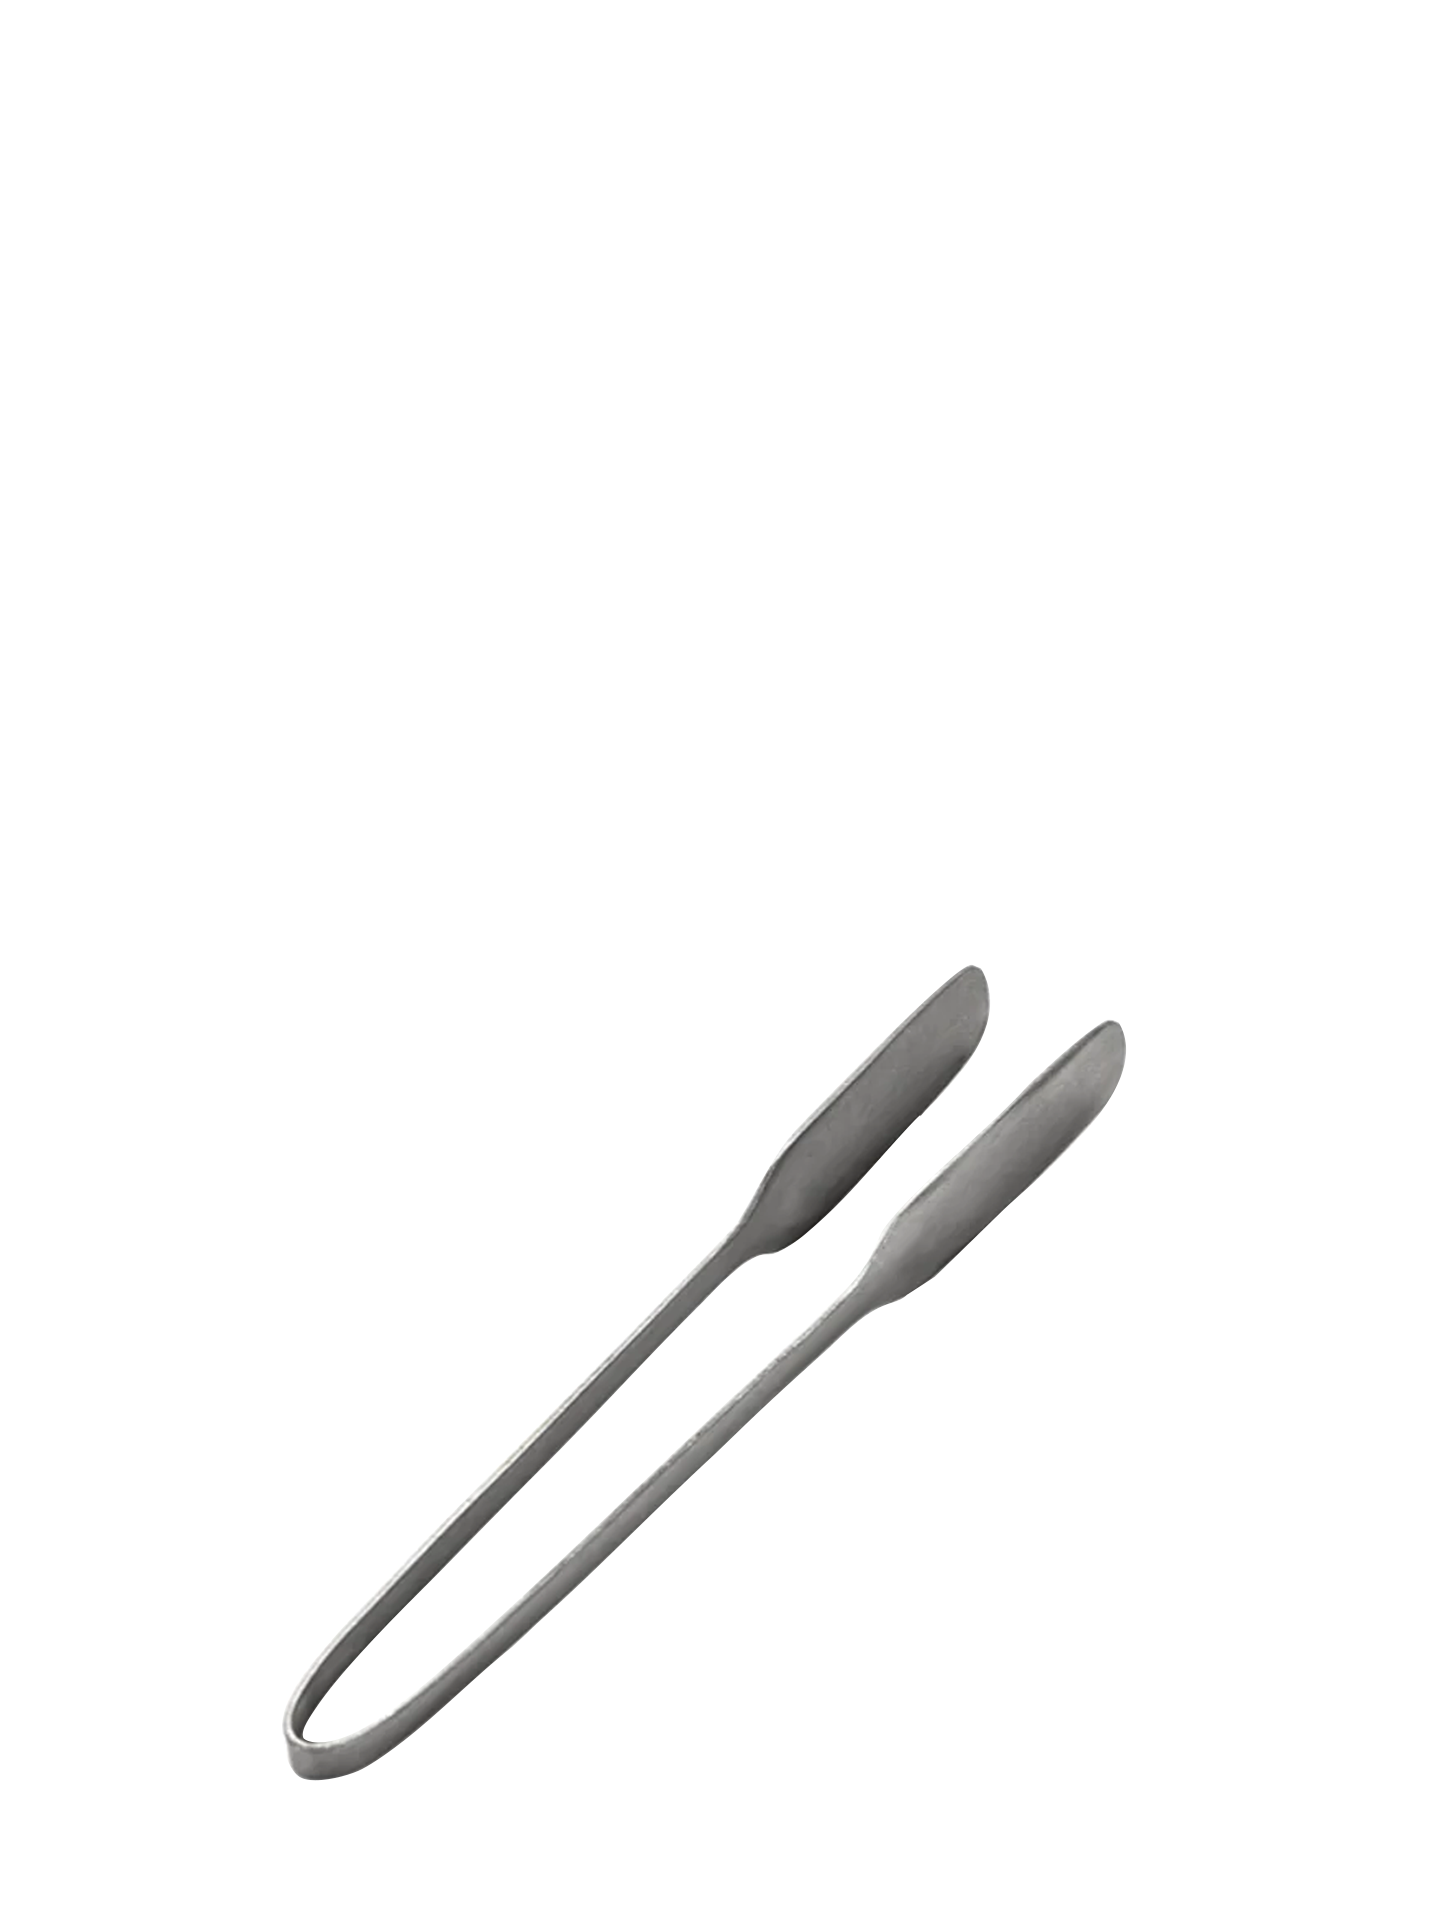 Small tongs from Serax, designed by Parisian concept store Merci.